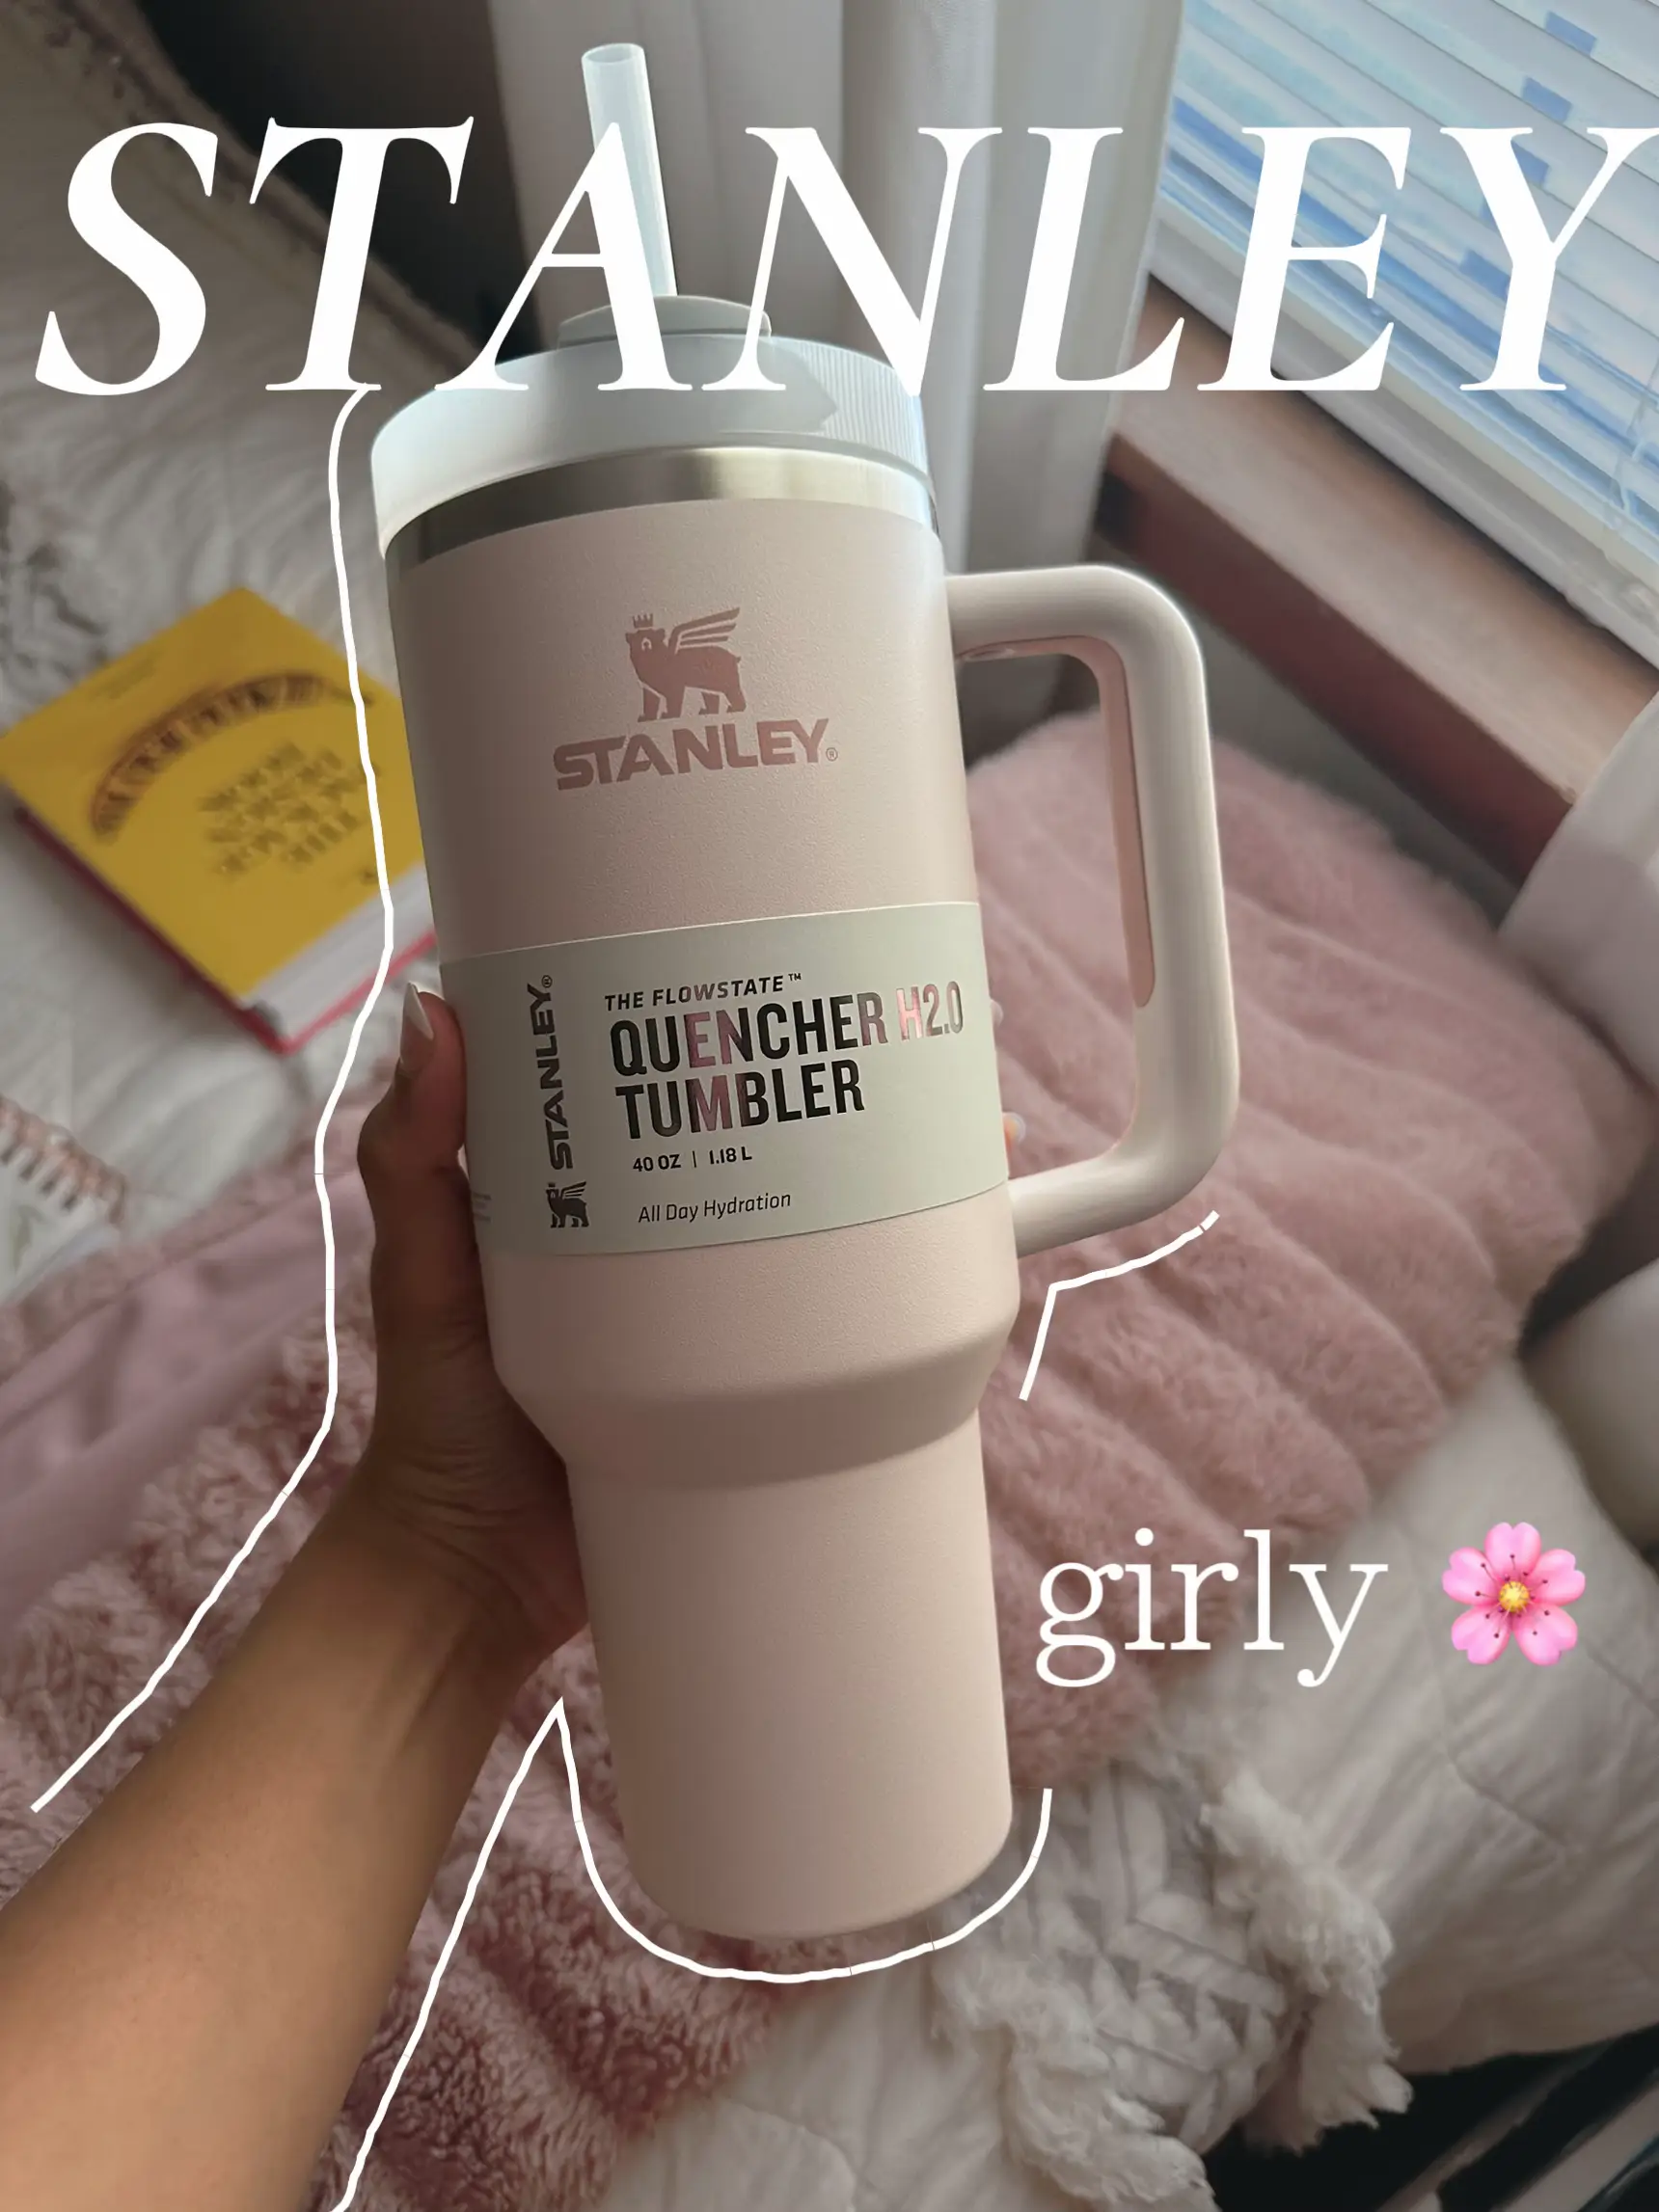 New Stanley Colors ✨, Gallery posted by Everyday_tina